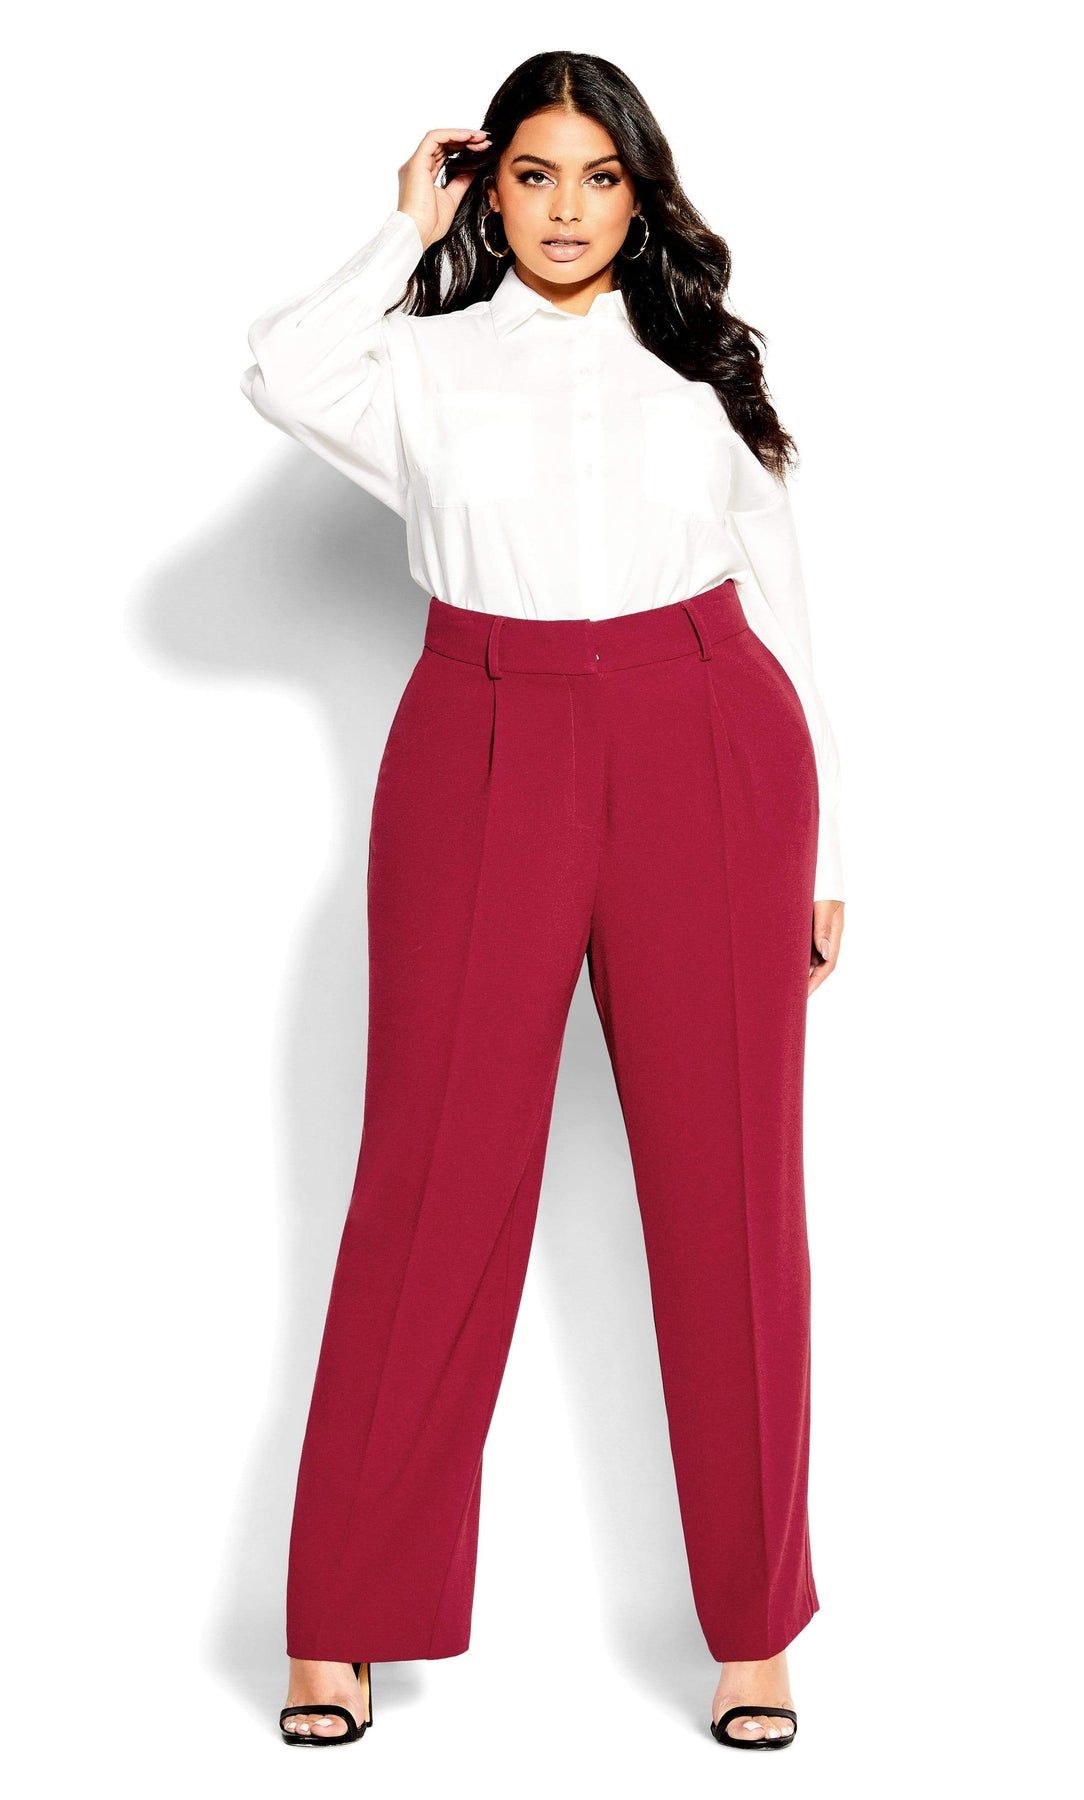 How to Style Red Pants Best 15 Eye Catching  Beautiful Outfits for Women   FMagcom